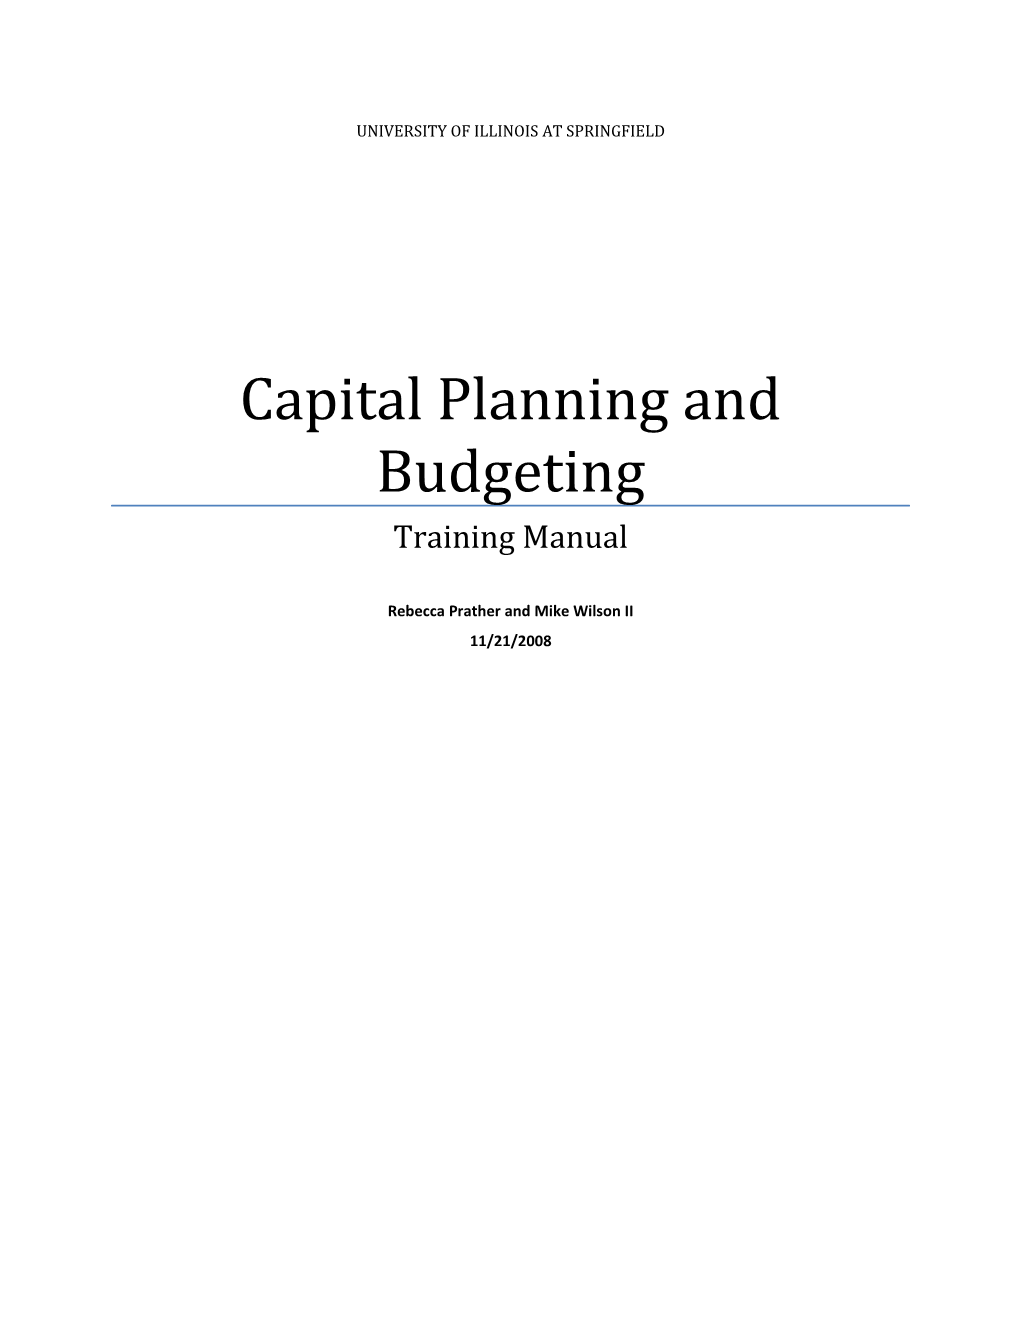 Capital Planning and Budgeting